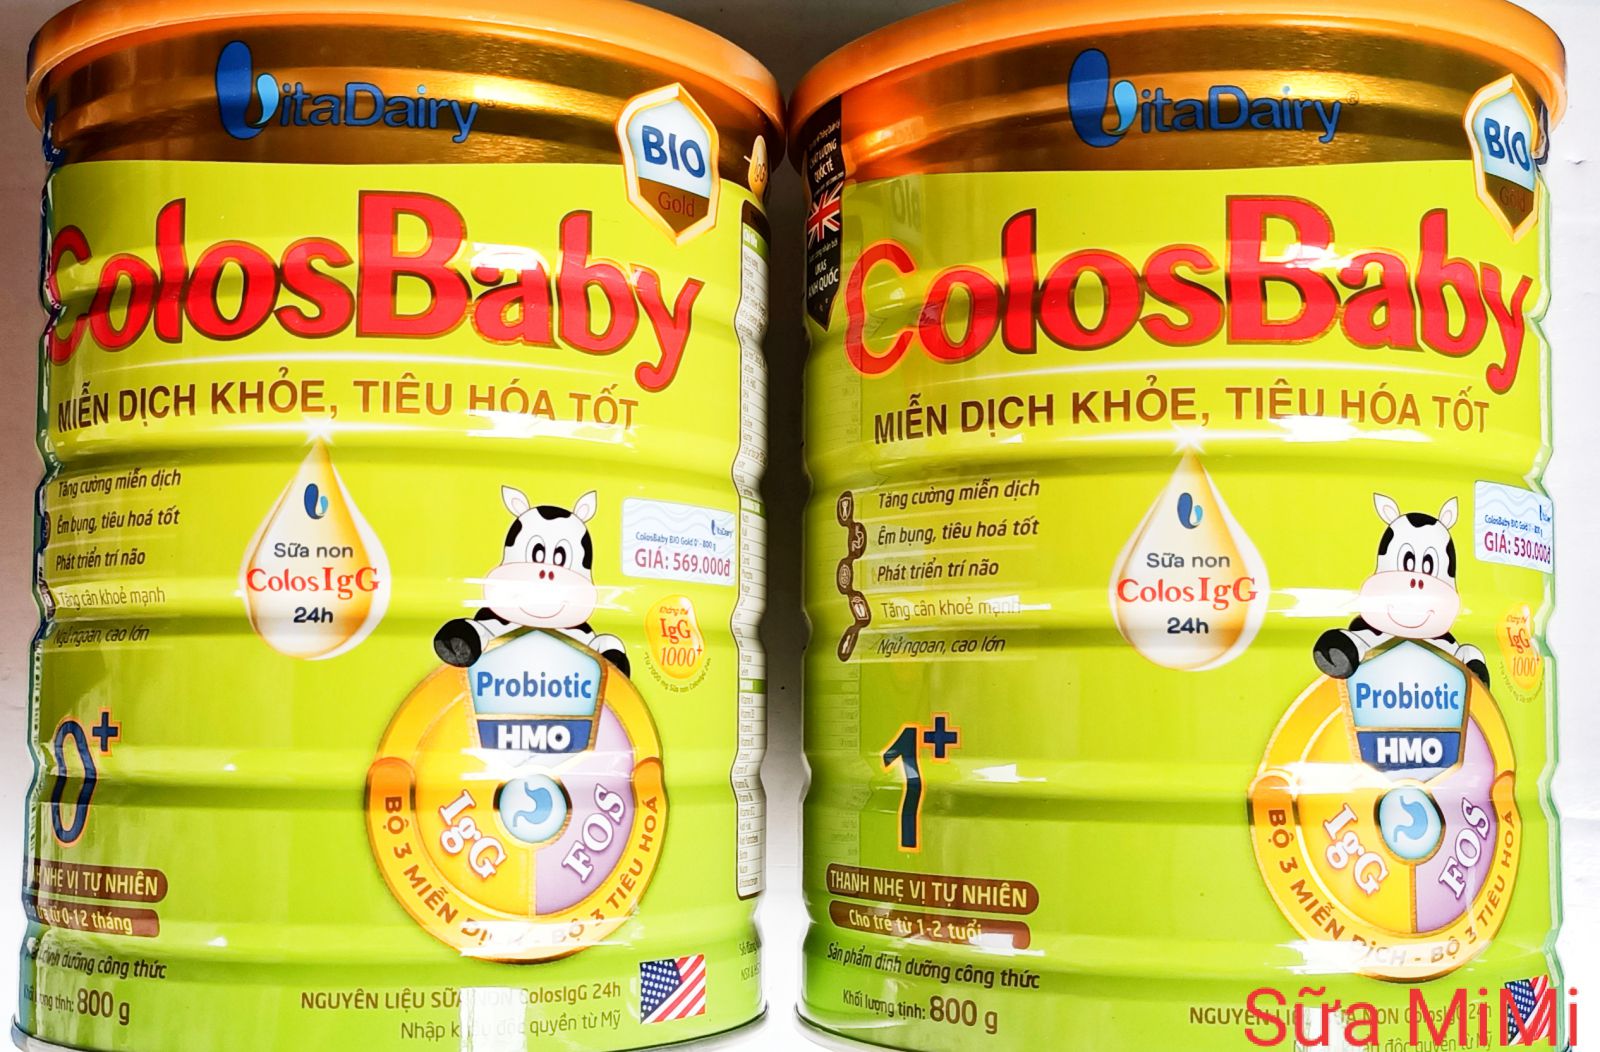 Colosbaby Bio Gold